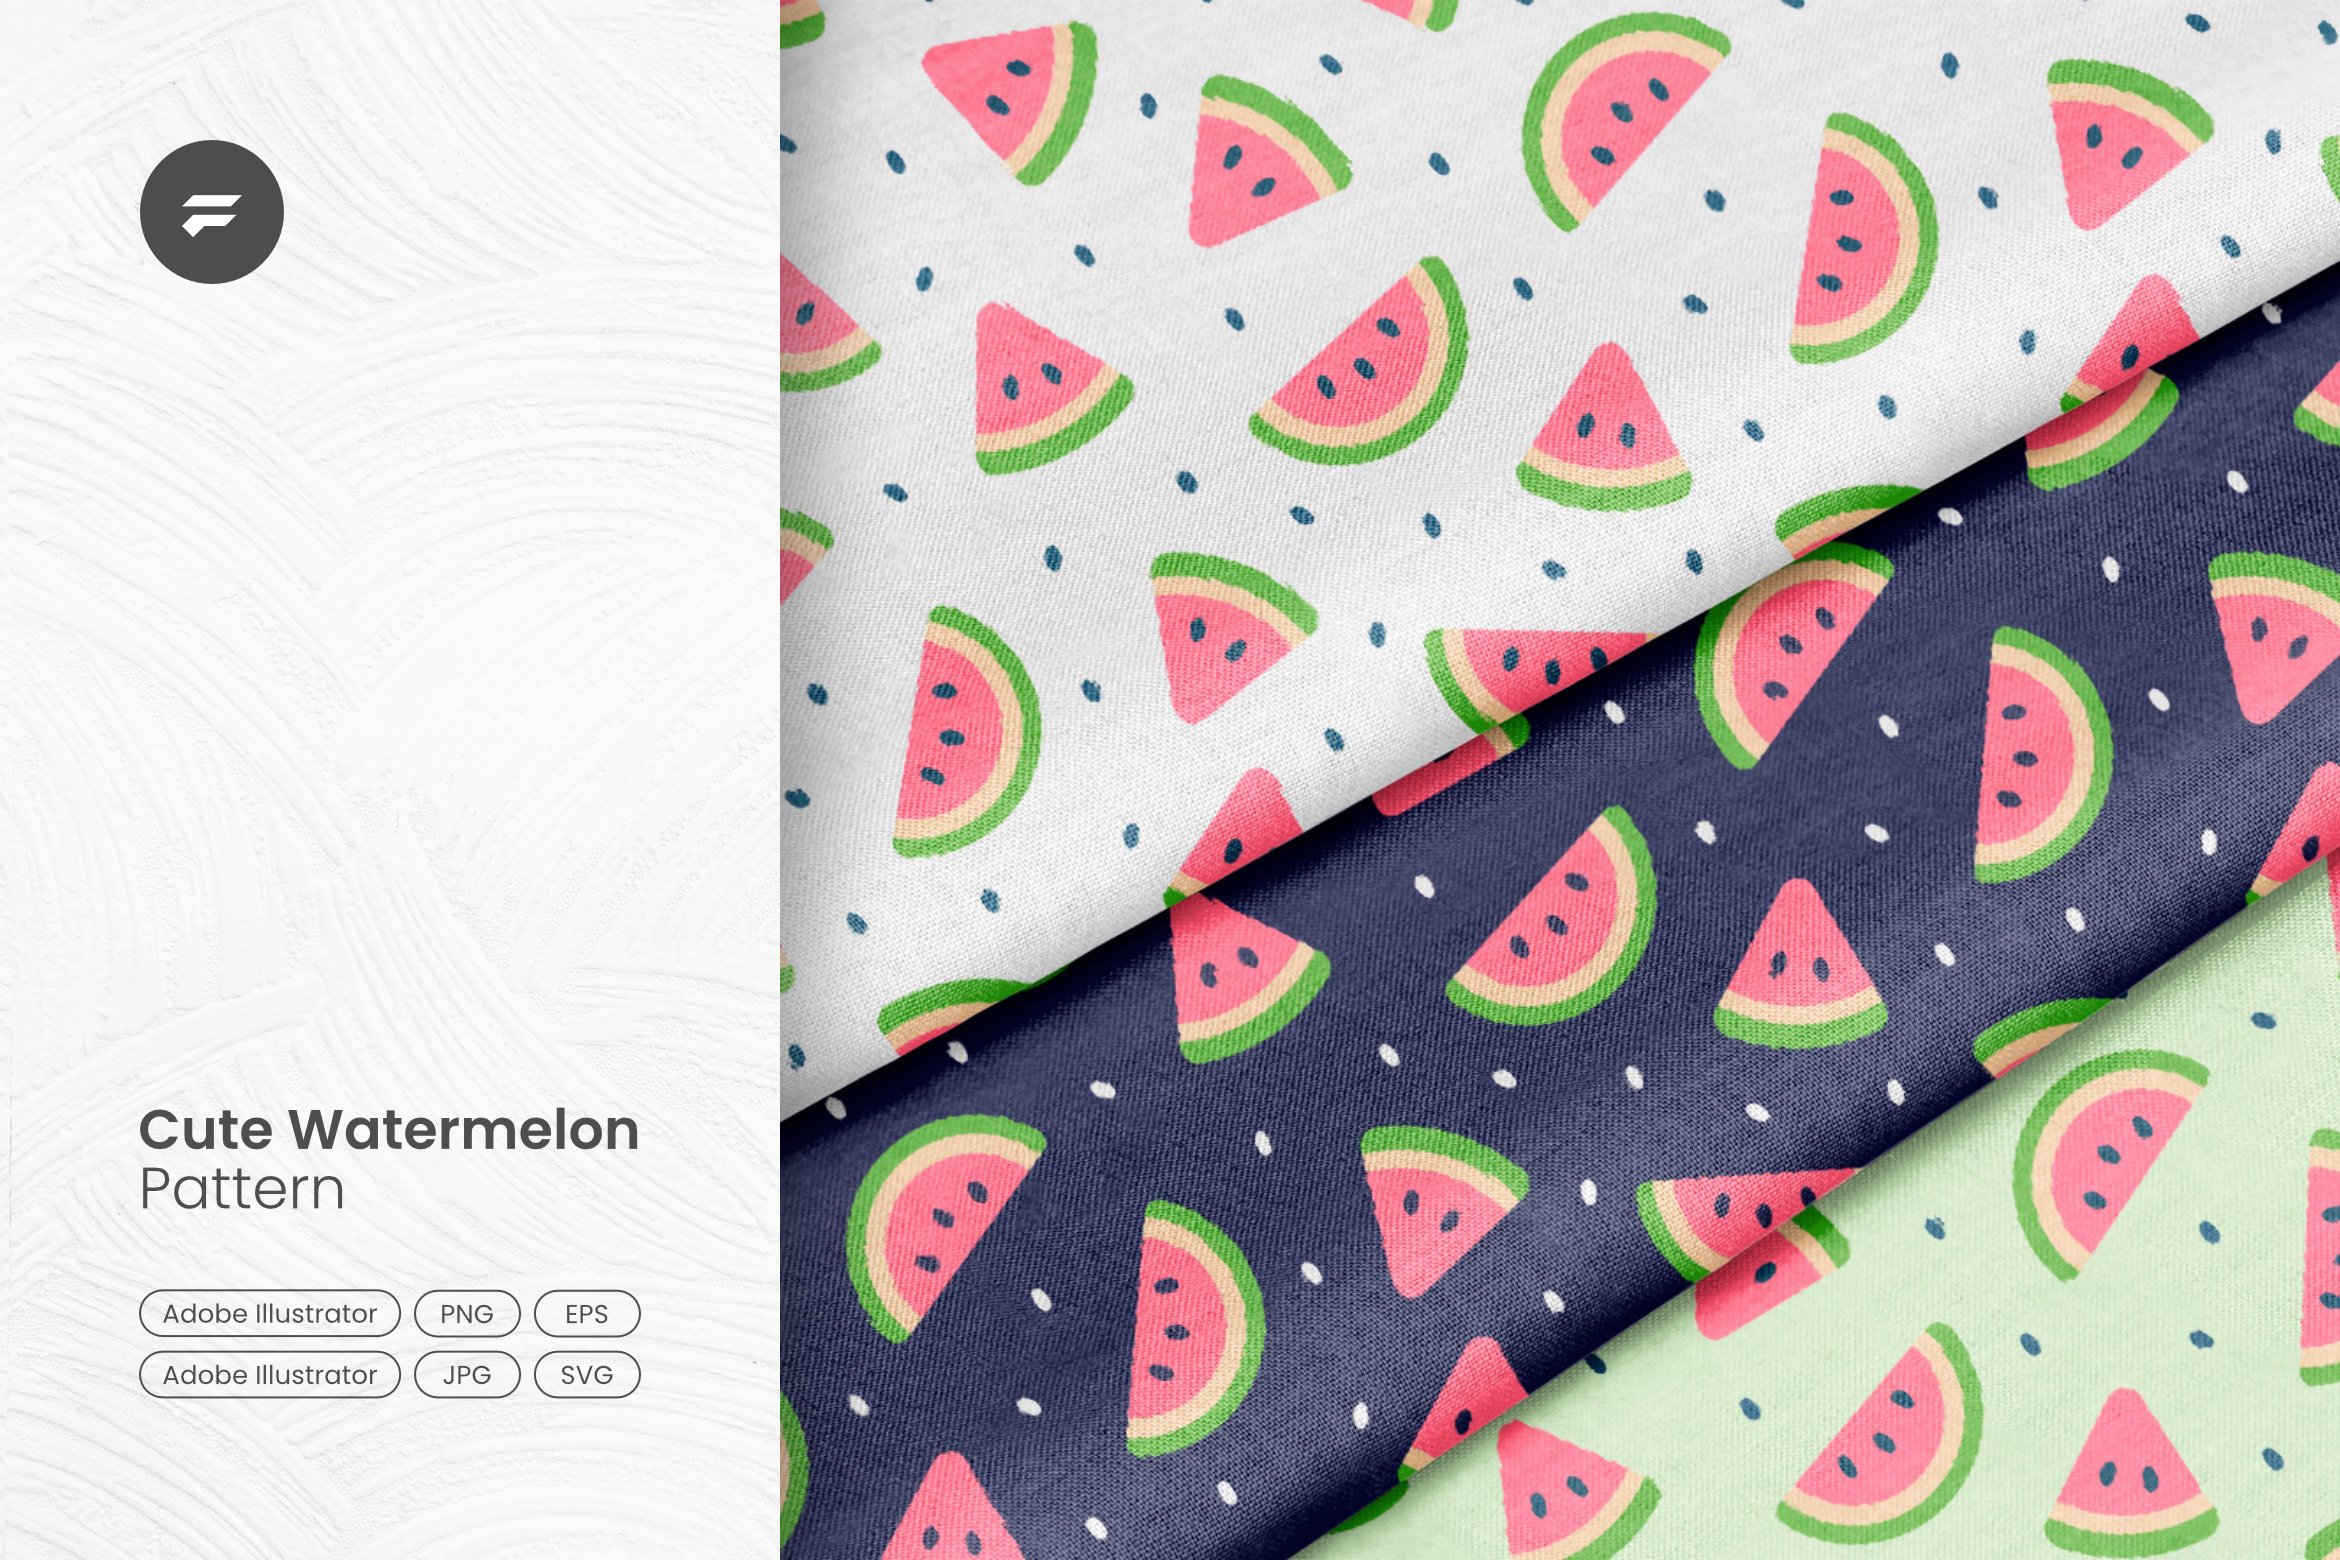 Cute Watermelon Pattern cover image.